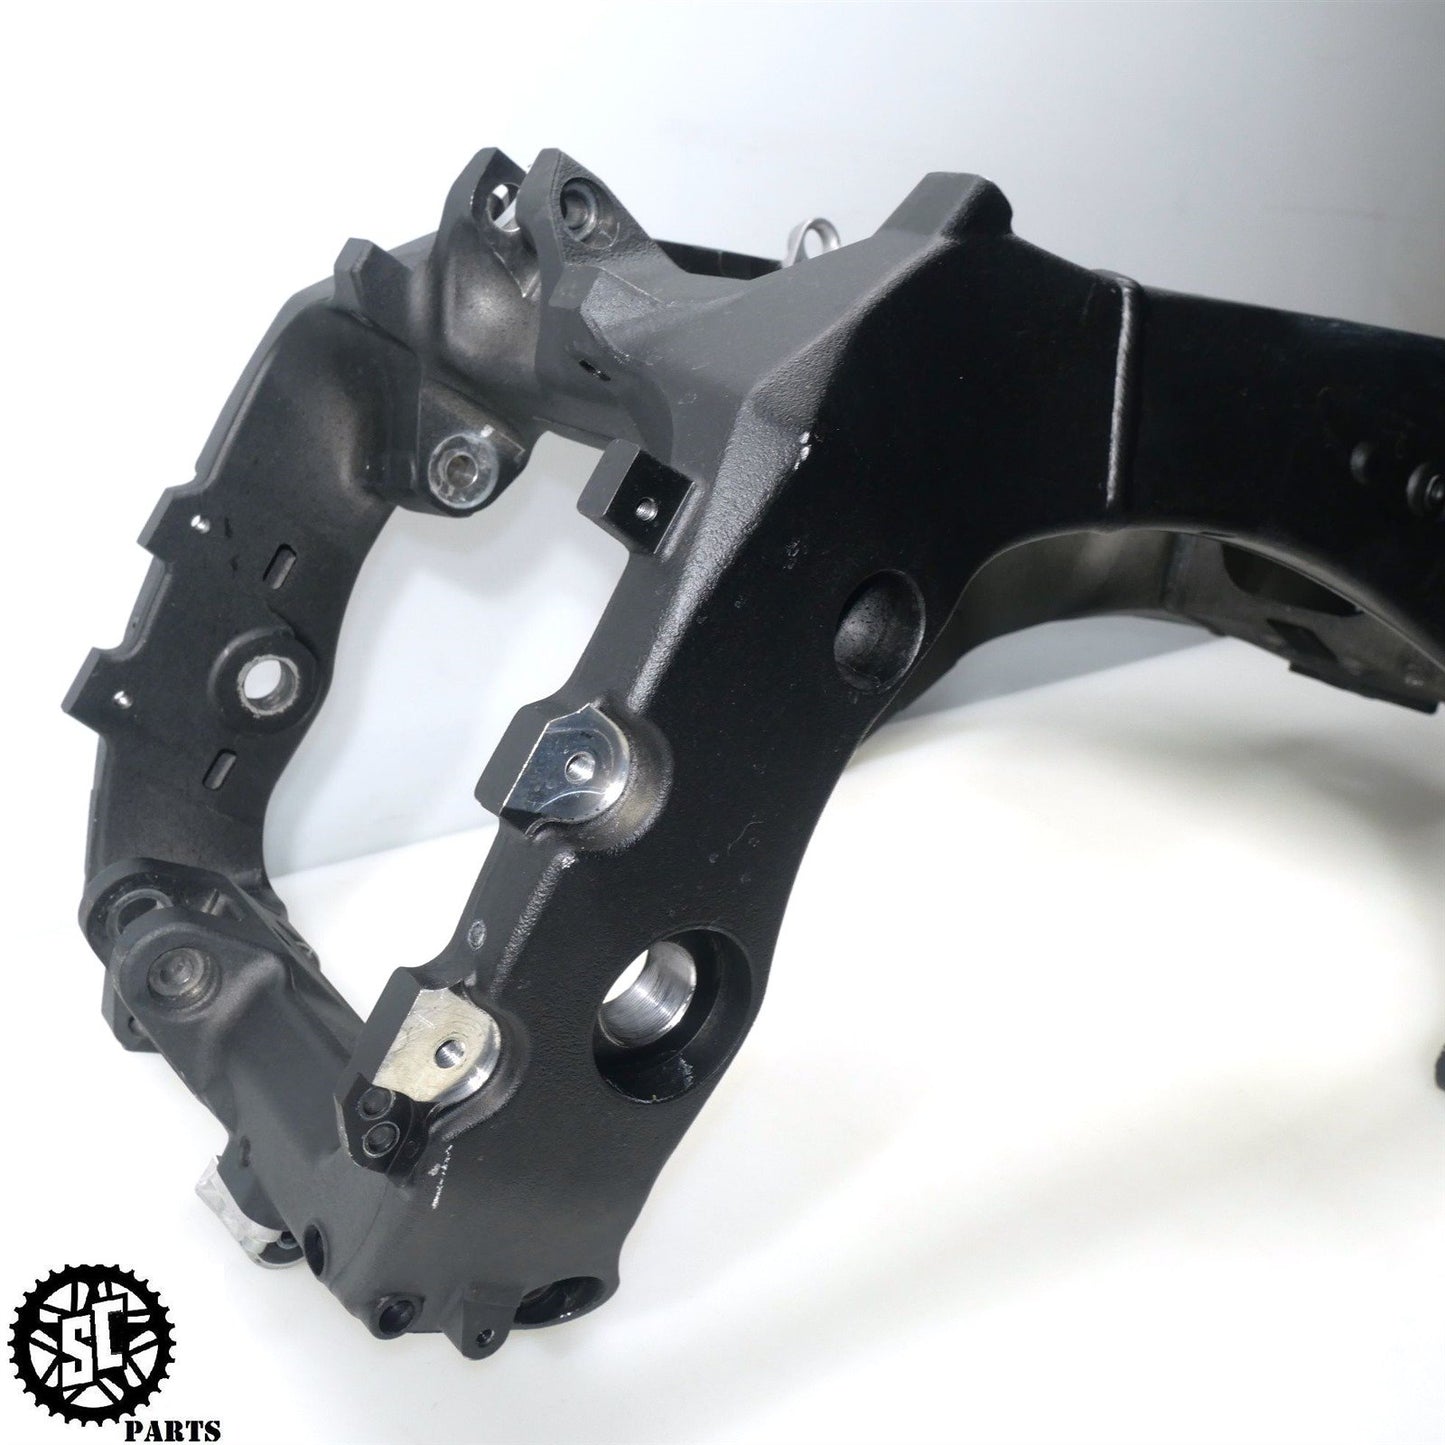 15-24 2019 YAMAHA YZF R1 FRAME CHASSIS *S* Y40